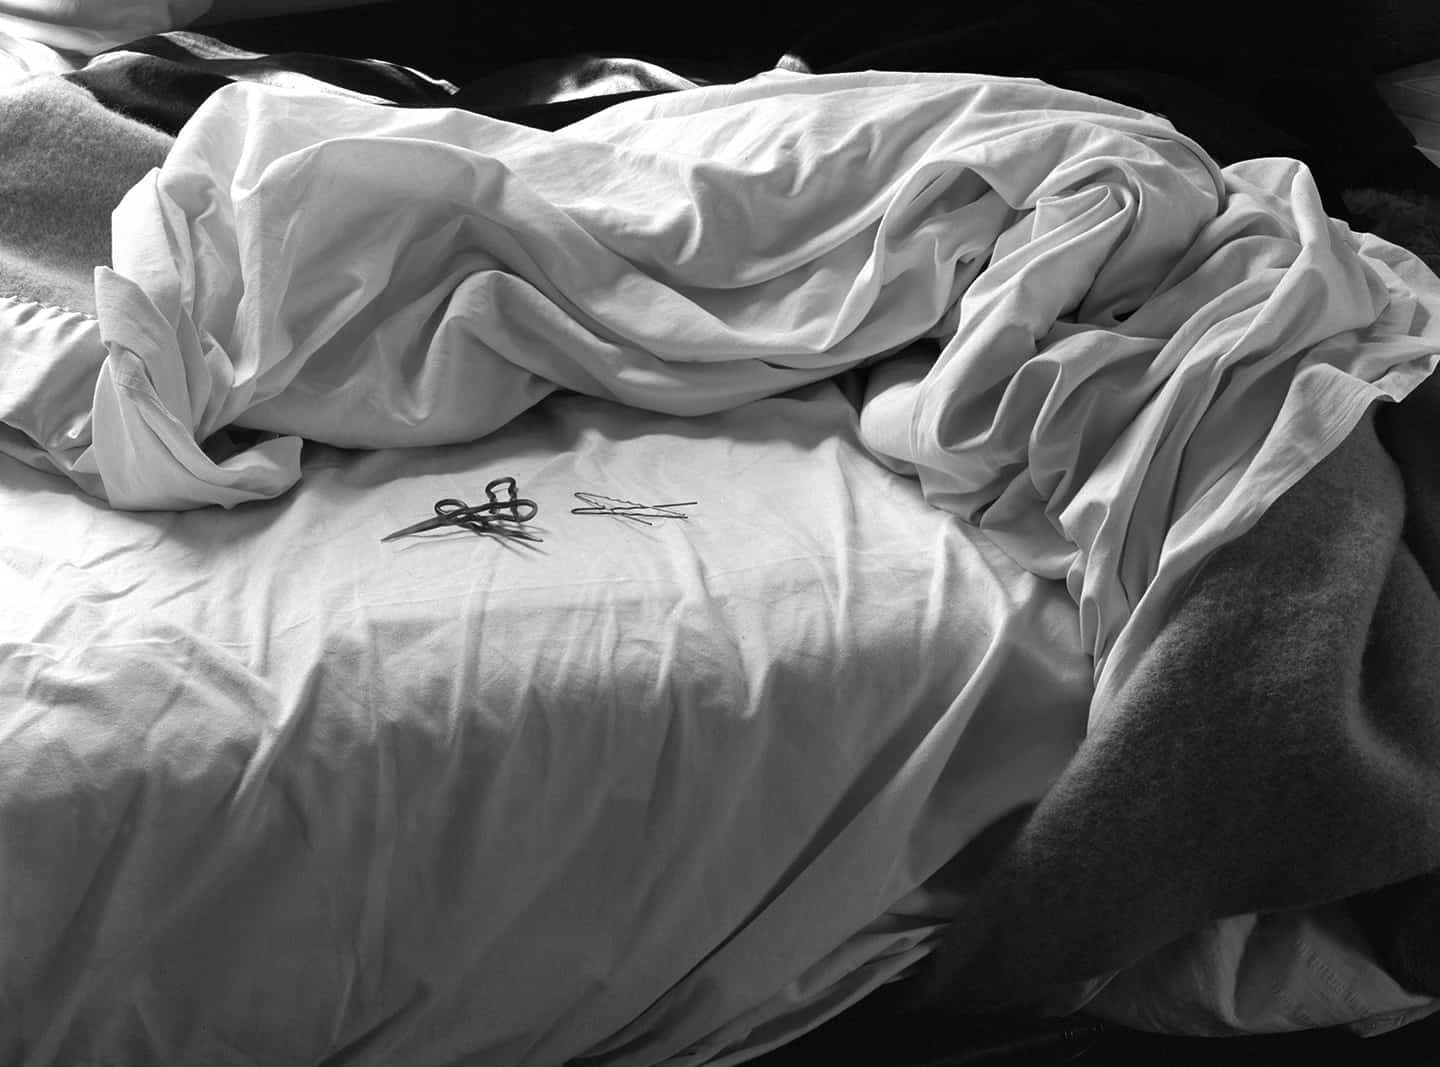 The Unmade Bed, 1957. ©Imogen Cunningham Trust